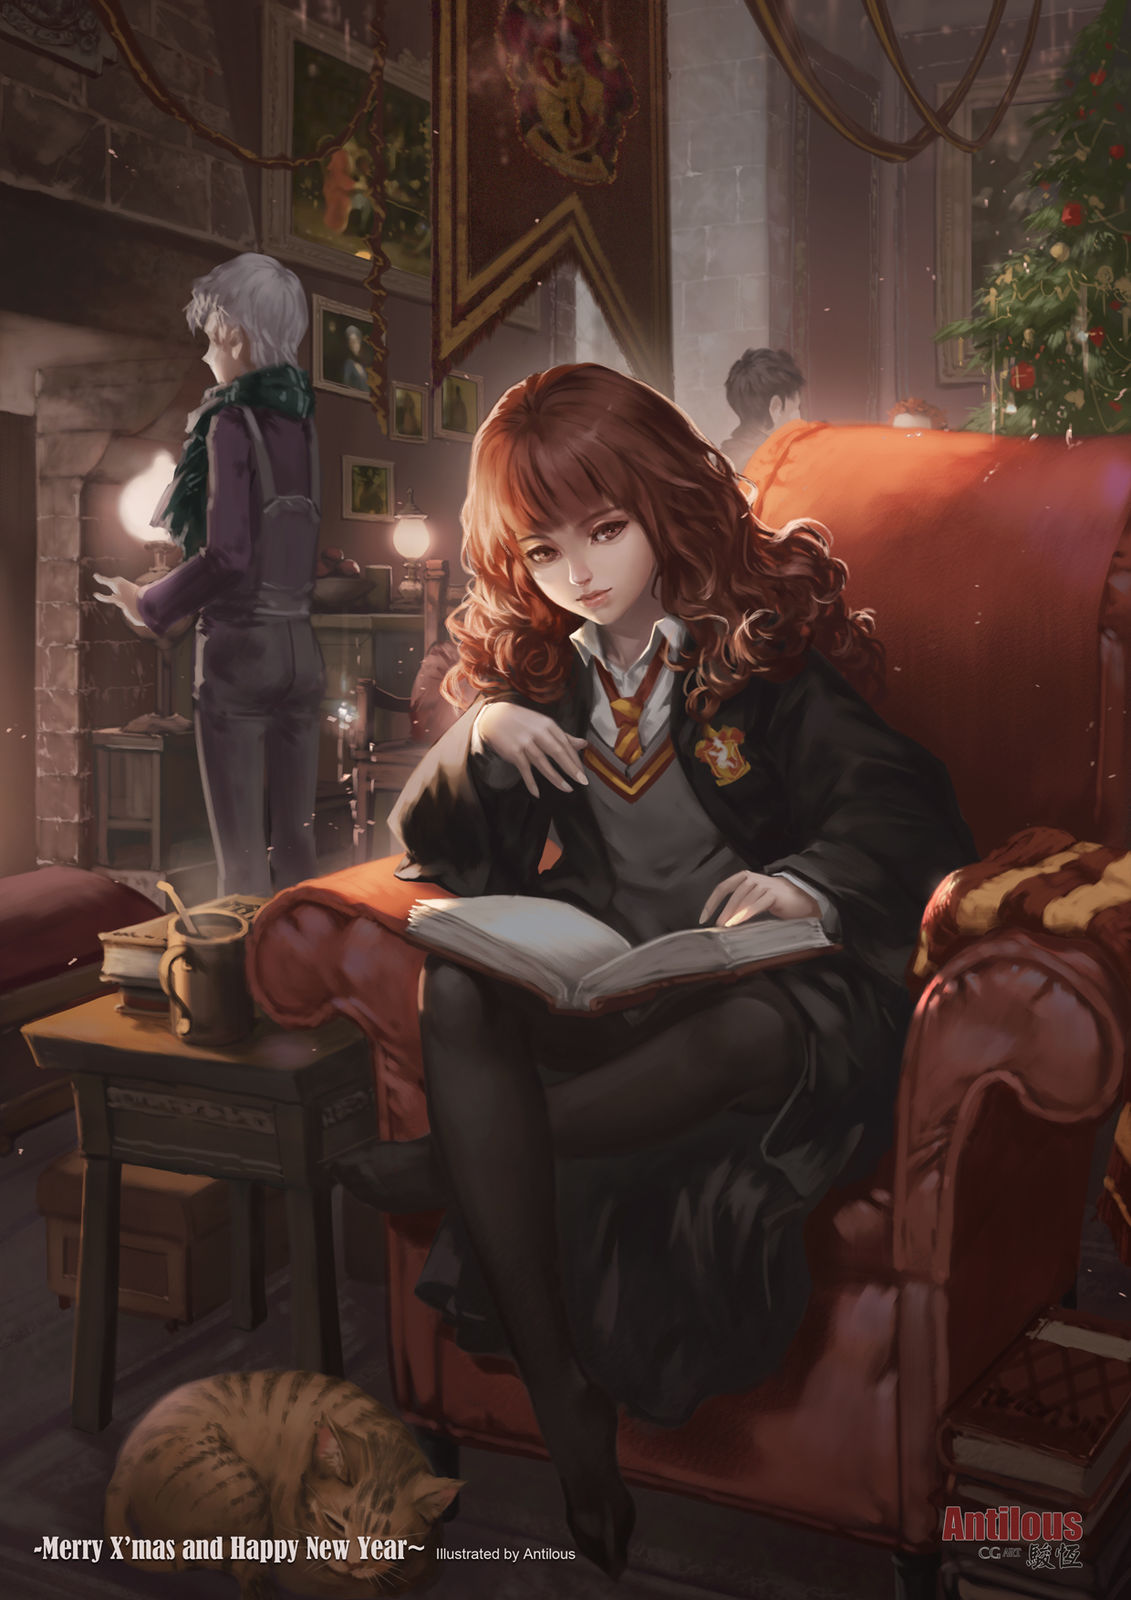 Merry Christmas in Gryffindor